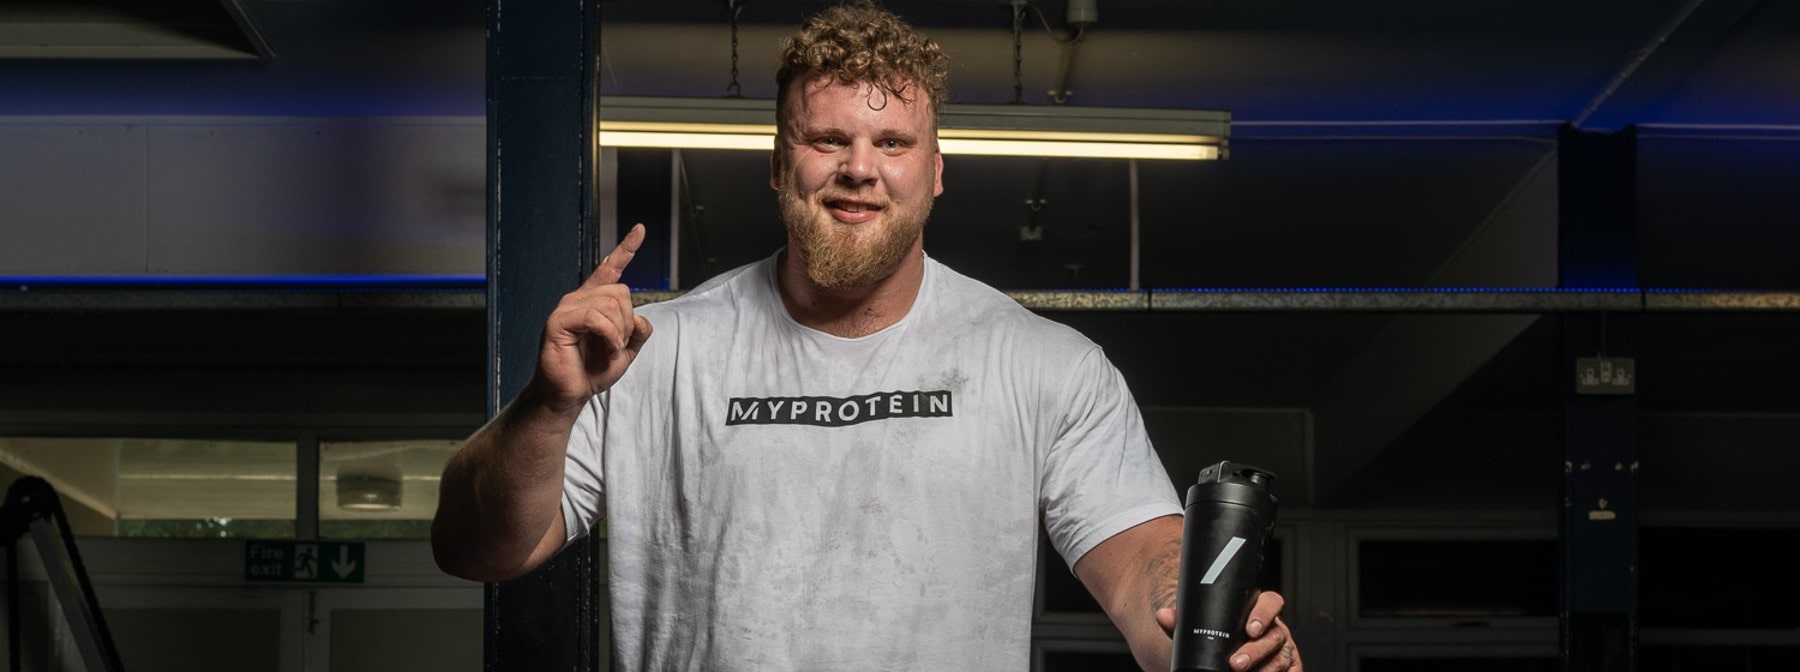 World’s Strongest Man Sees His Autism As A Superpower